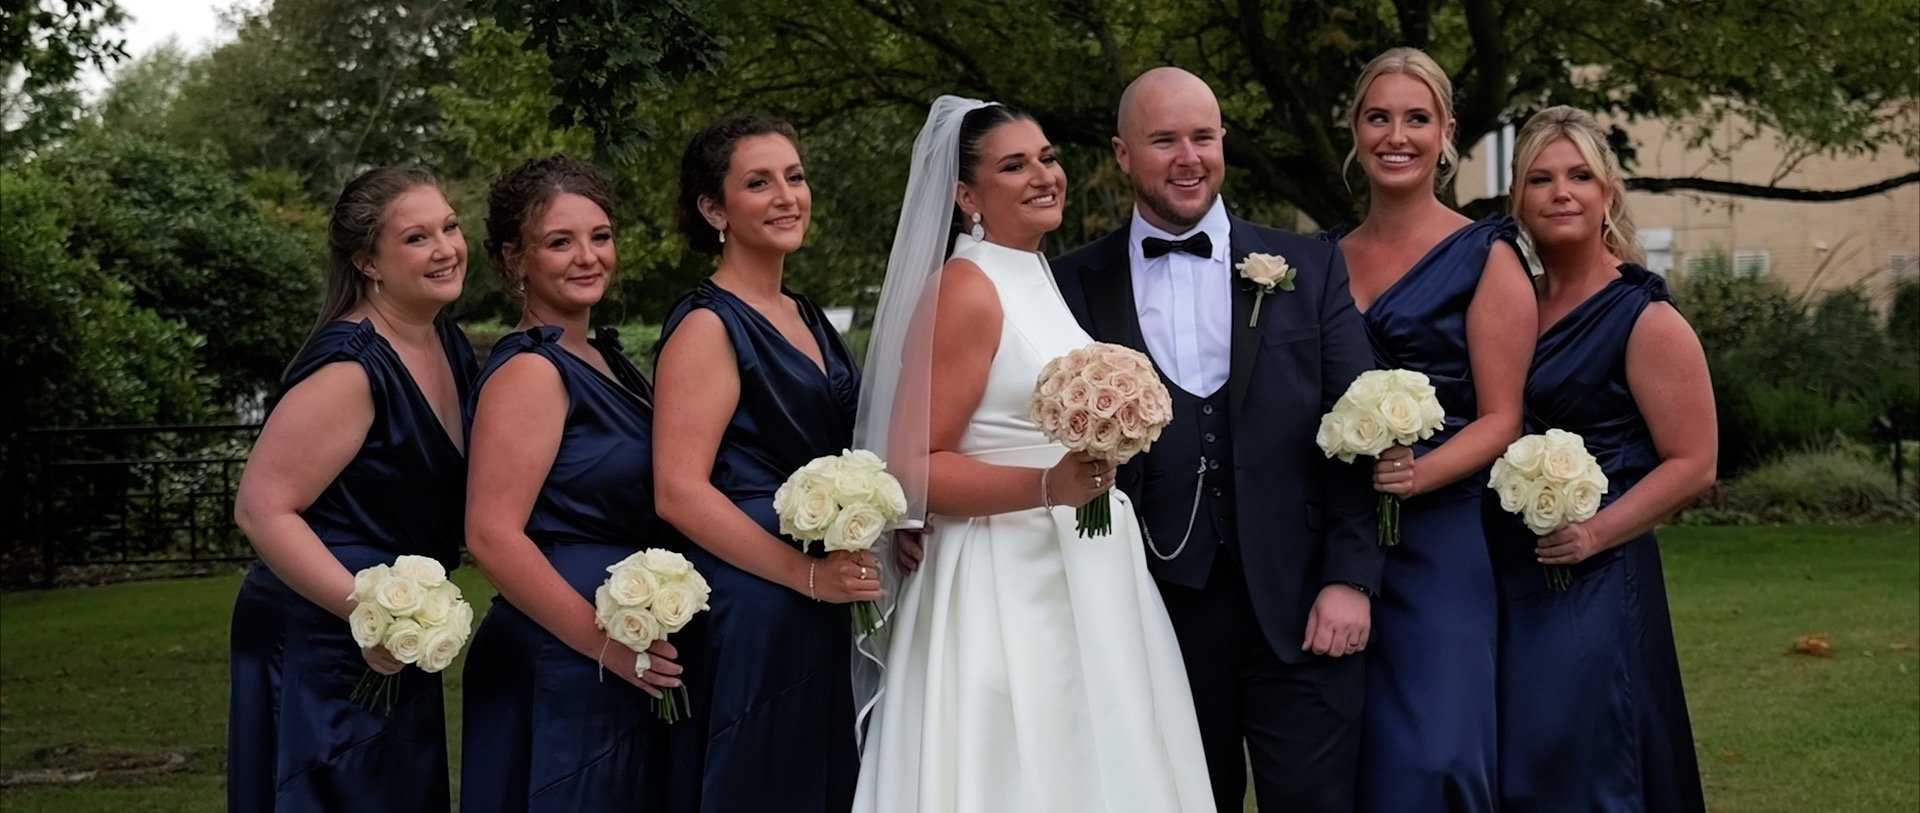 Sopwell House wedding videography - 3 Cheers Media - the photos - bridesmaids.jpg